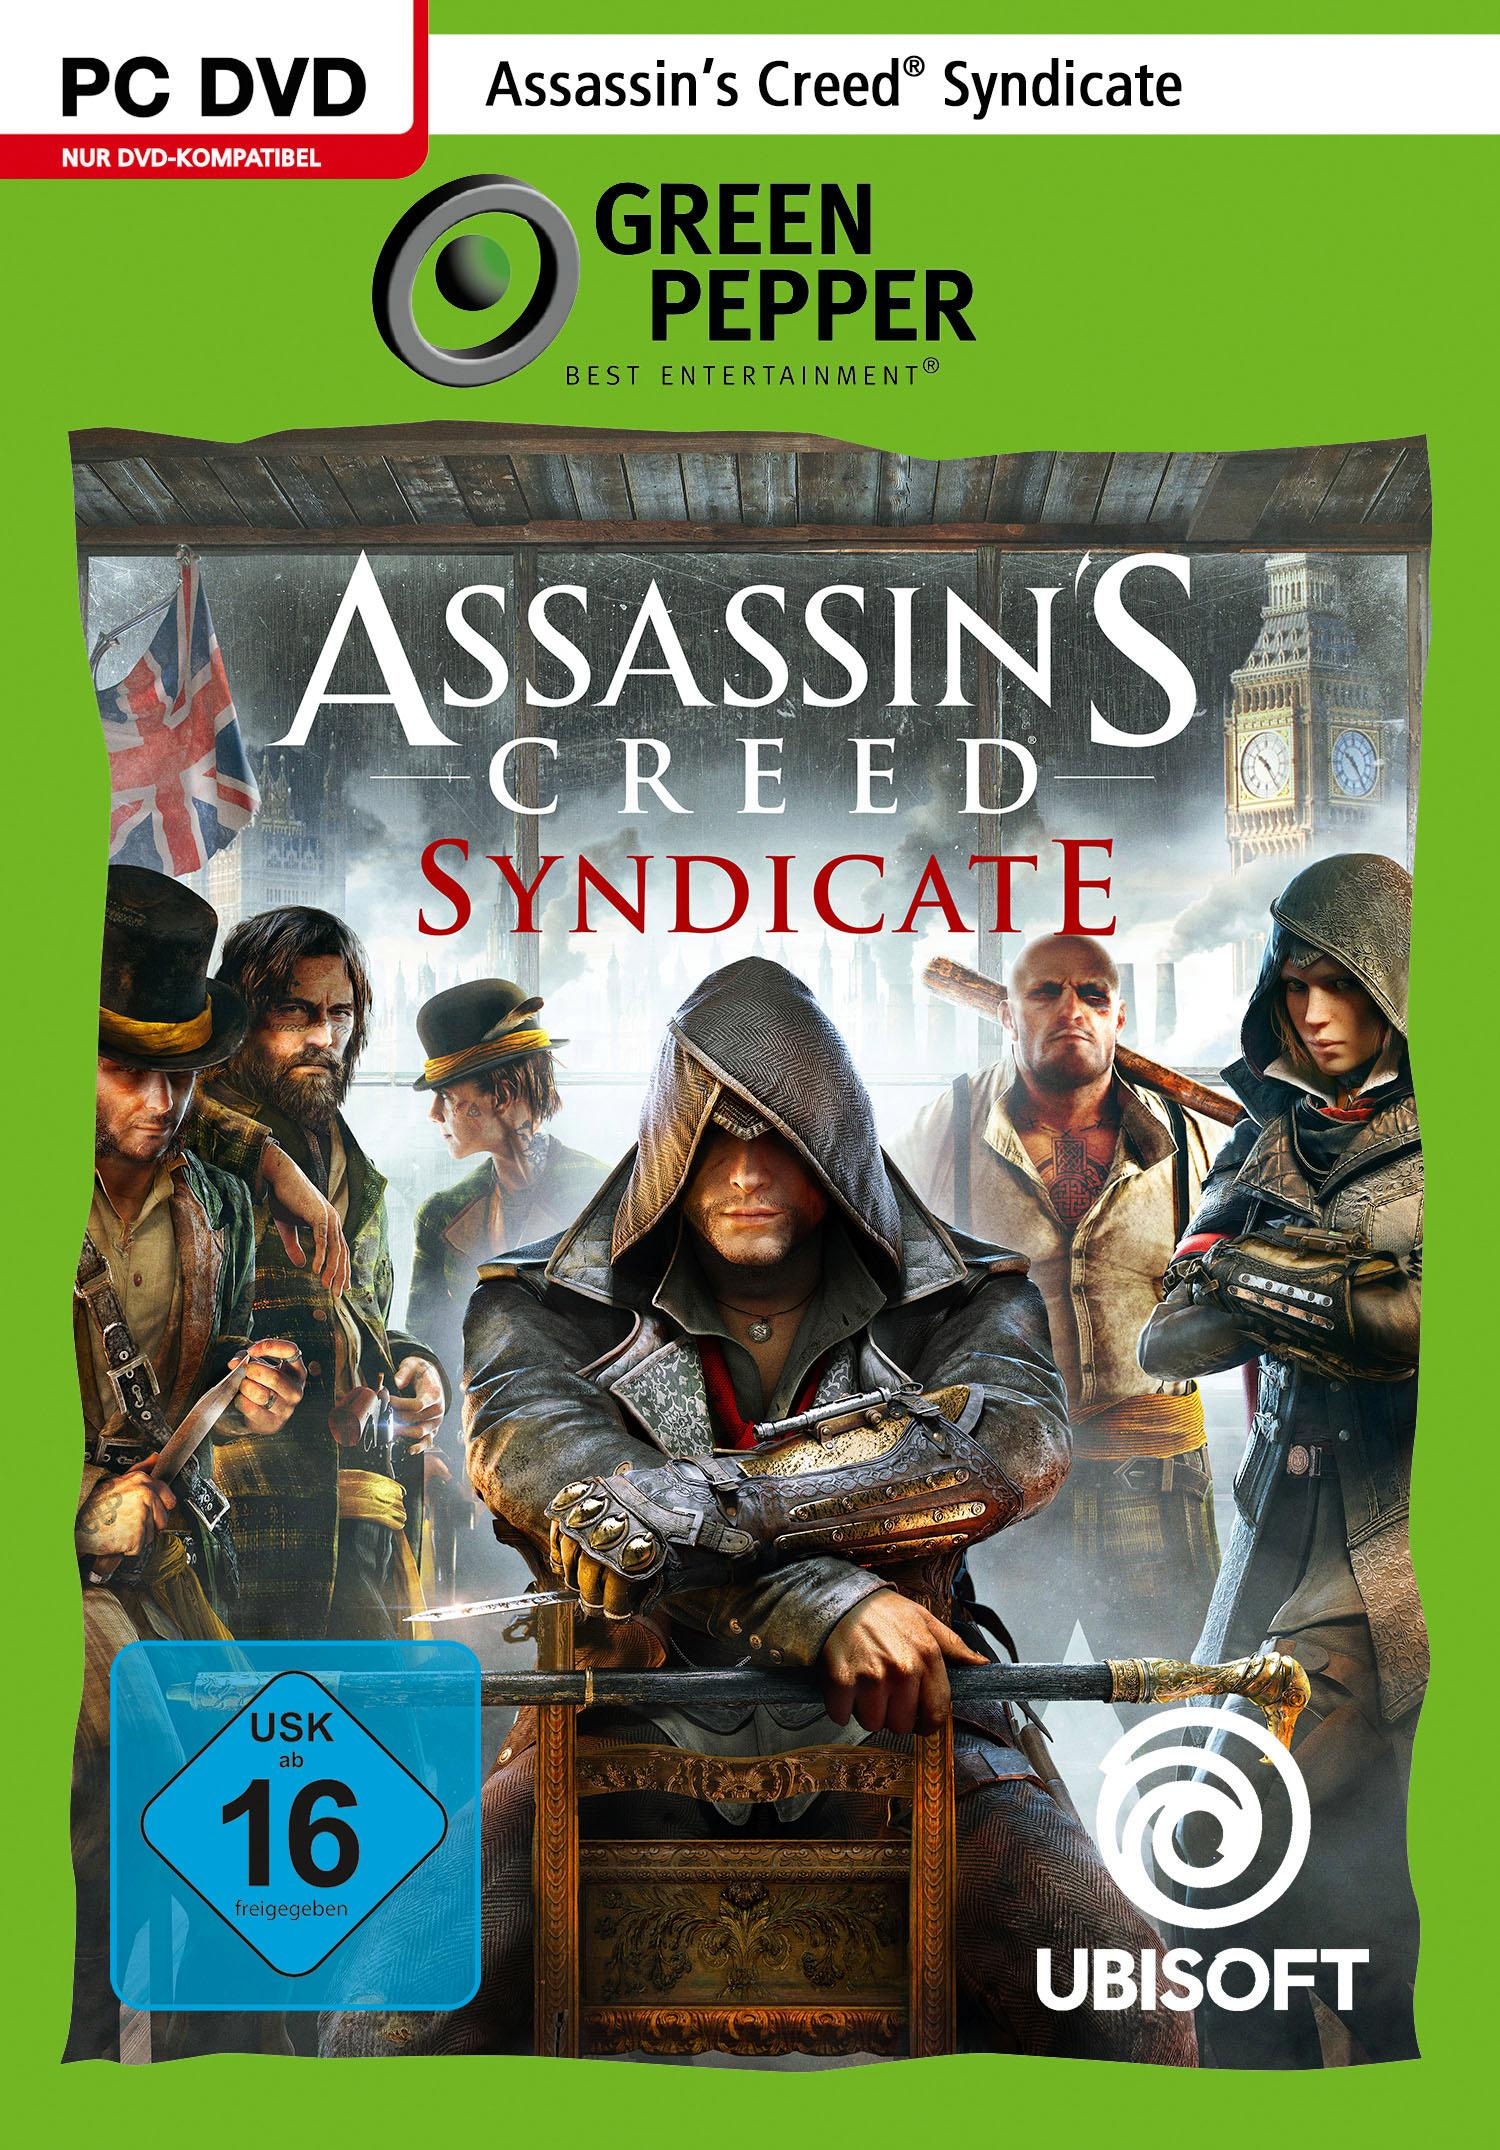 Spielesoftware »Assassin's Creed Syndicate«, PC, Software Pyramide